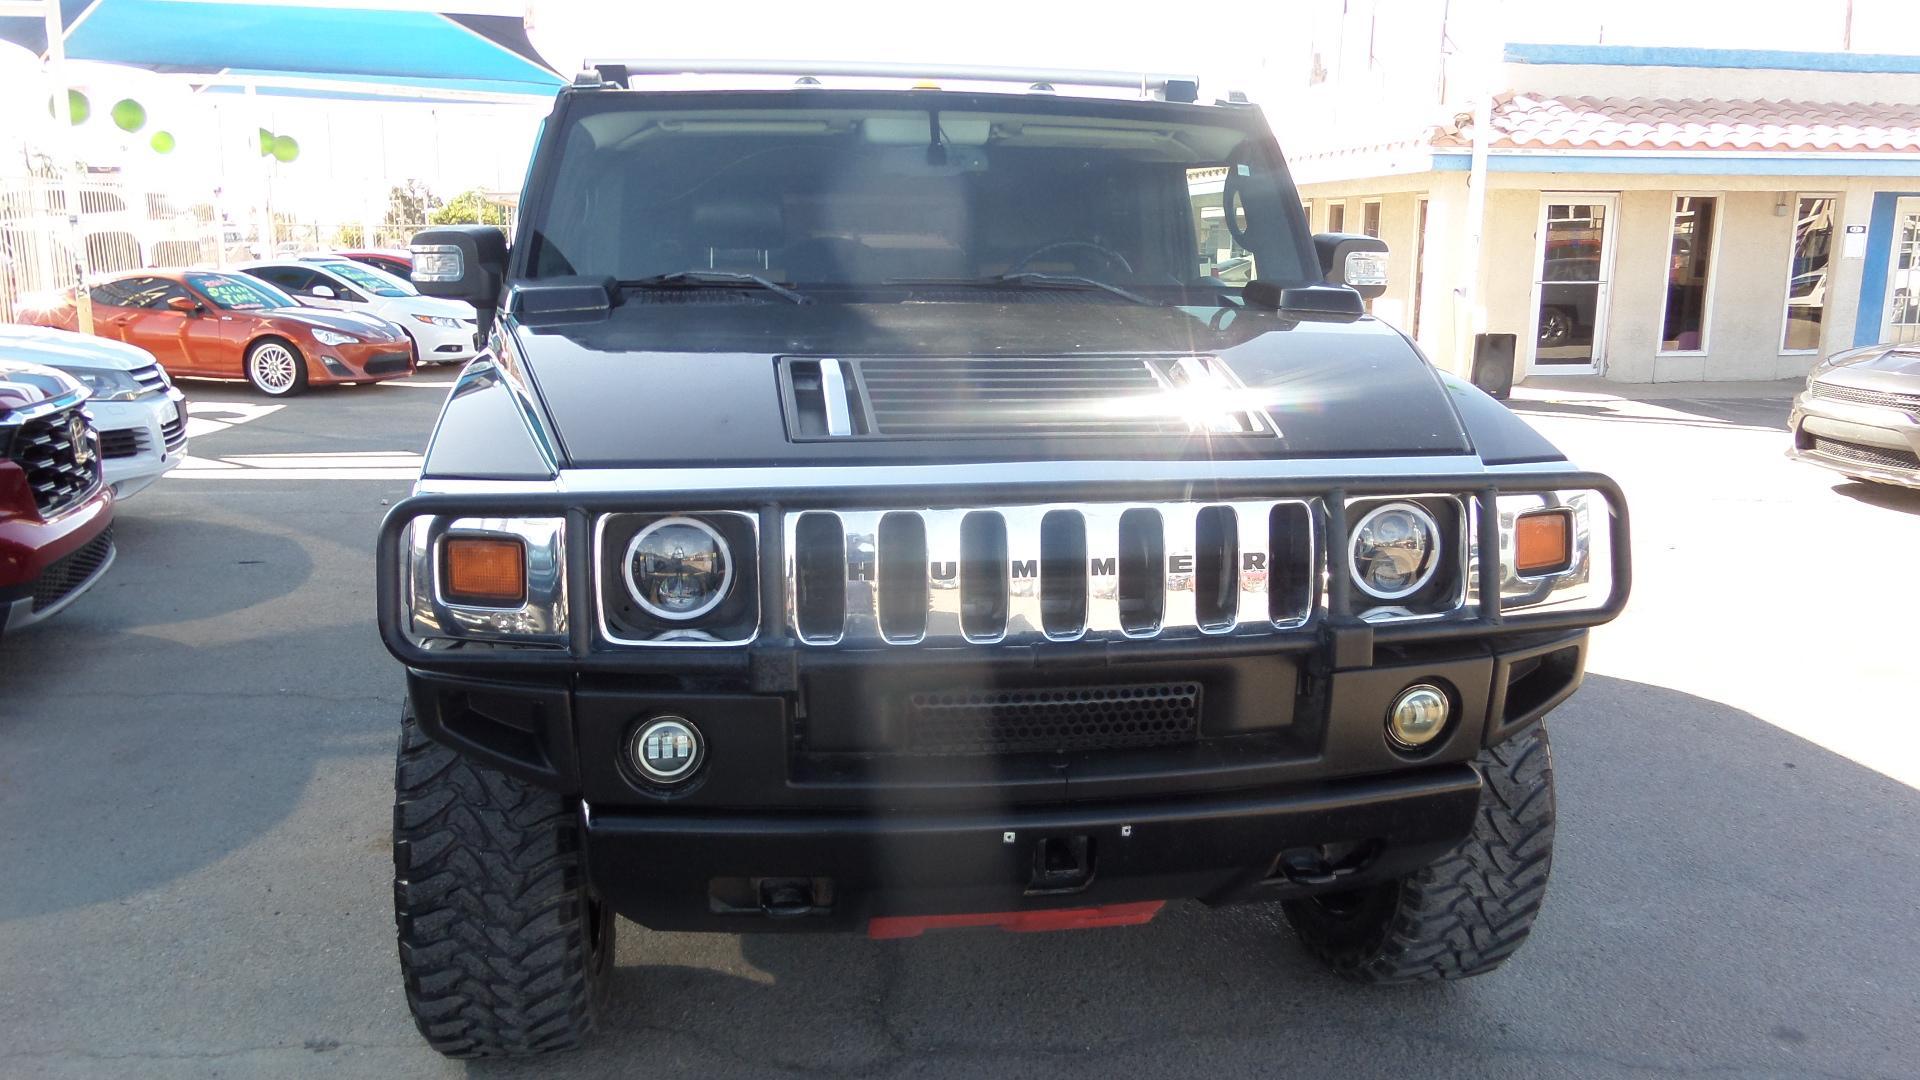 Used 2007 Hummer H2 SUV with VIN 5GRGN23U77H110743 for sale in El Paso, TX